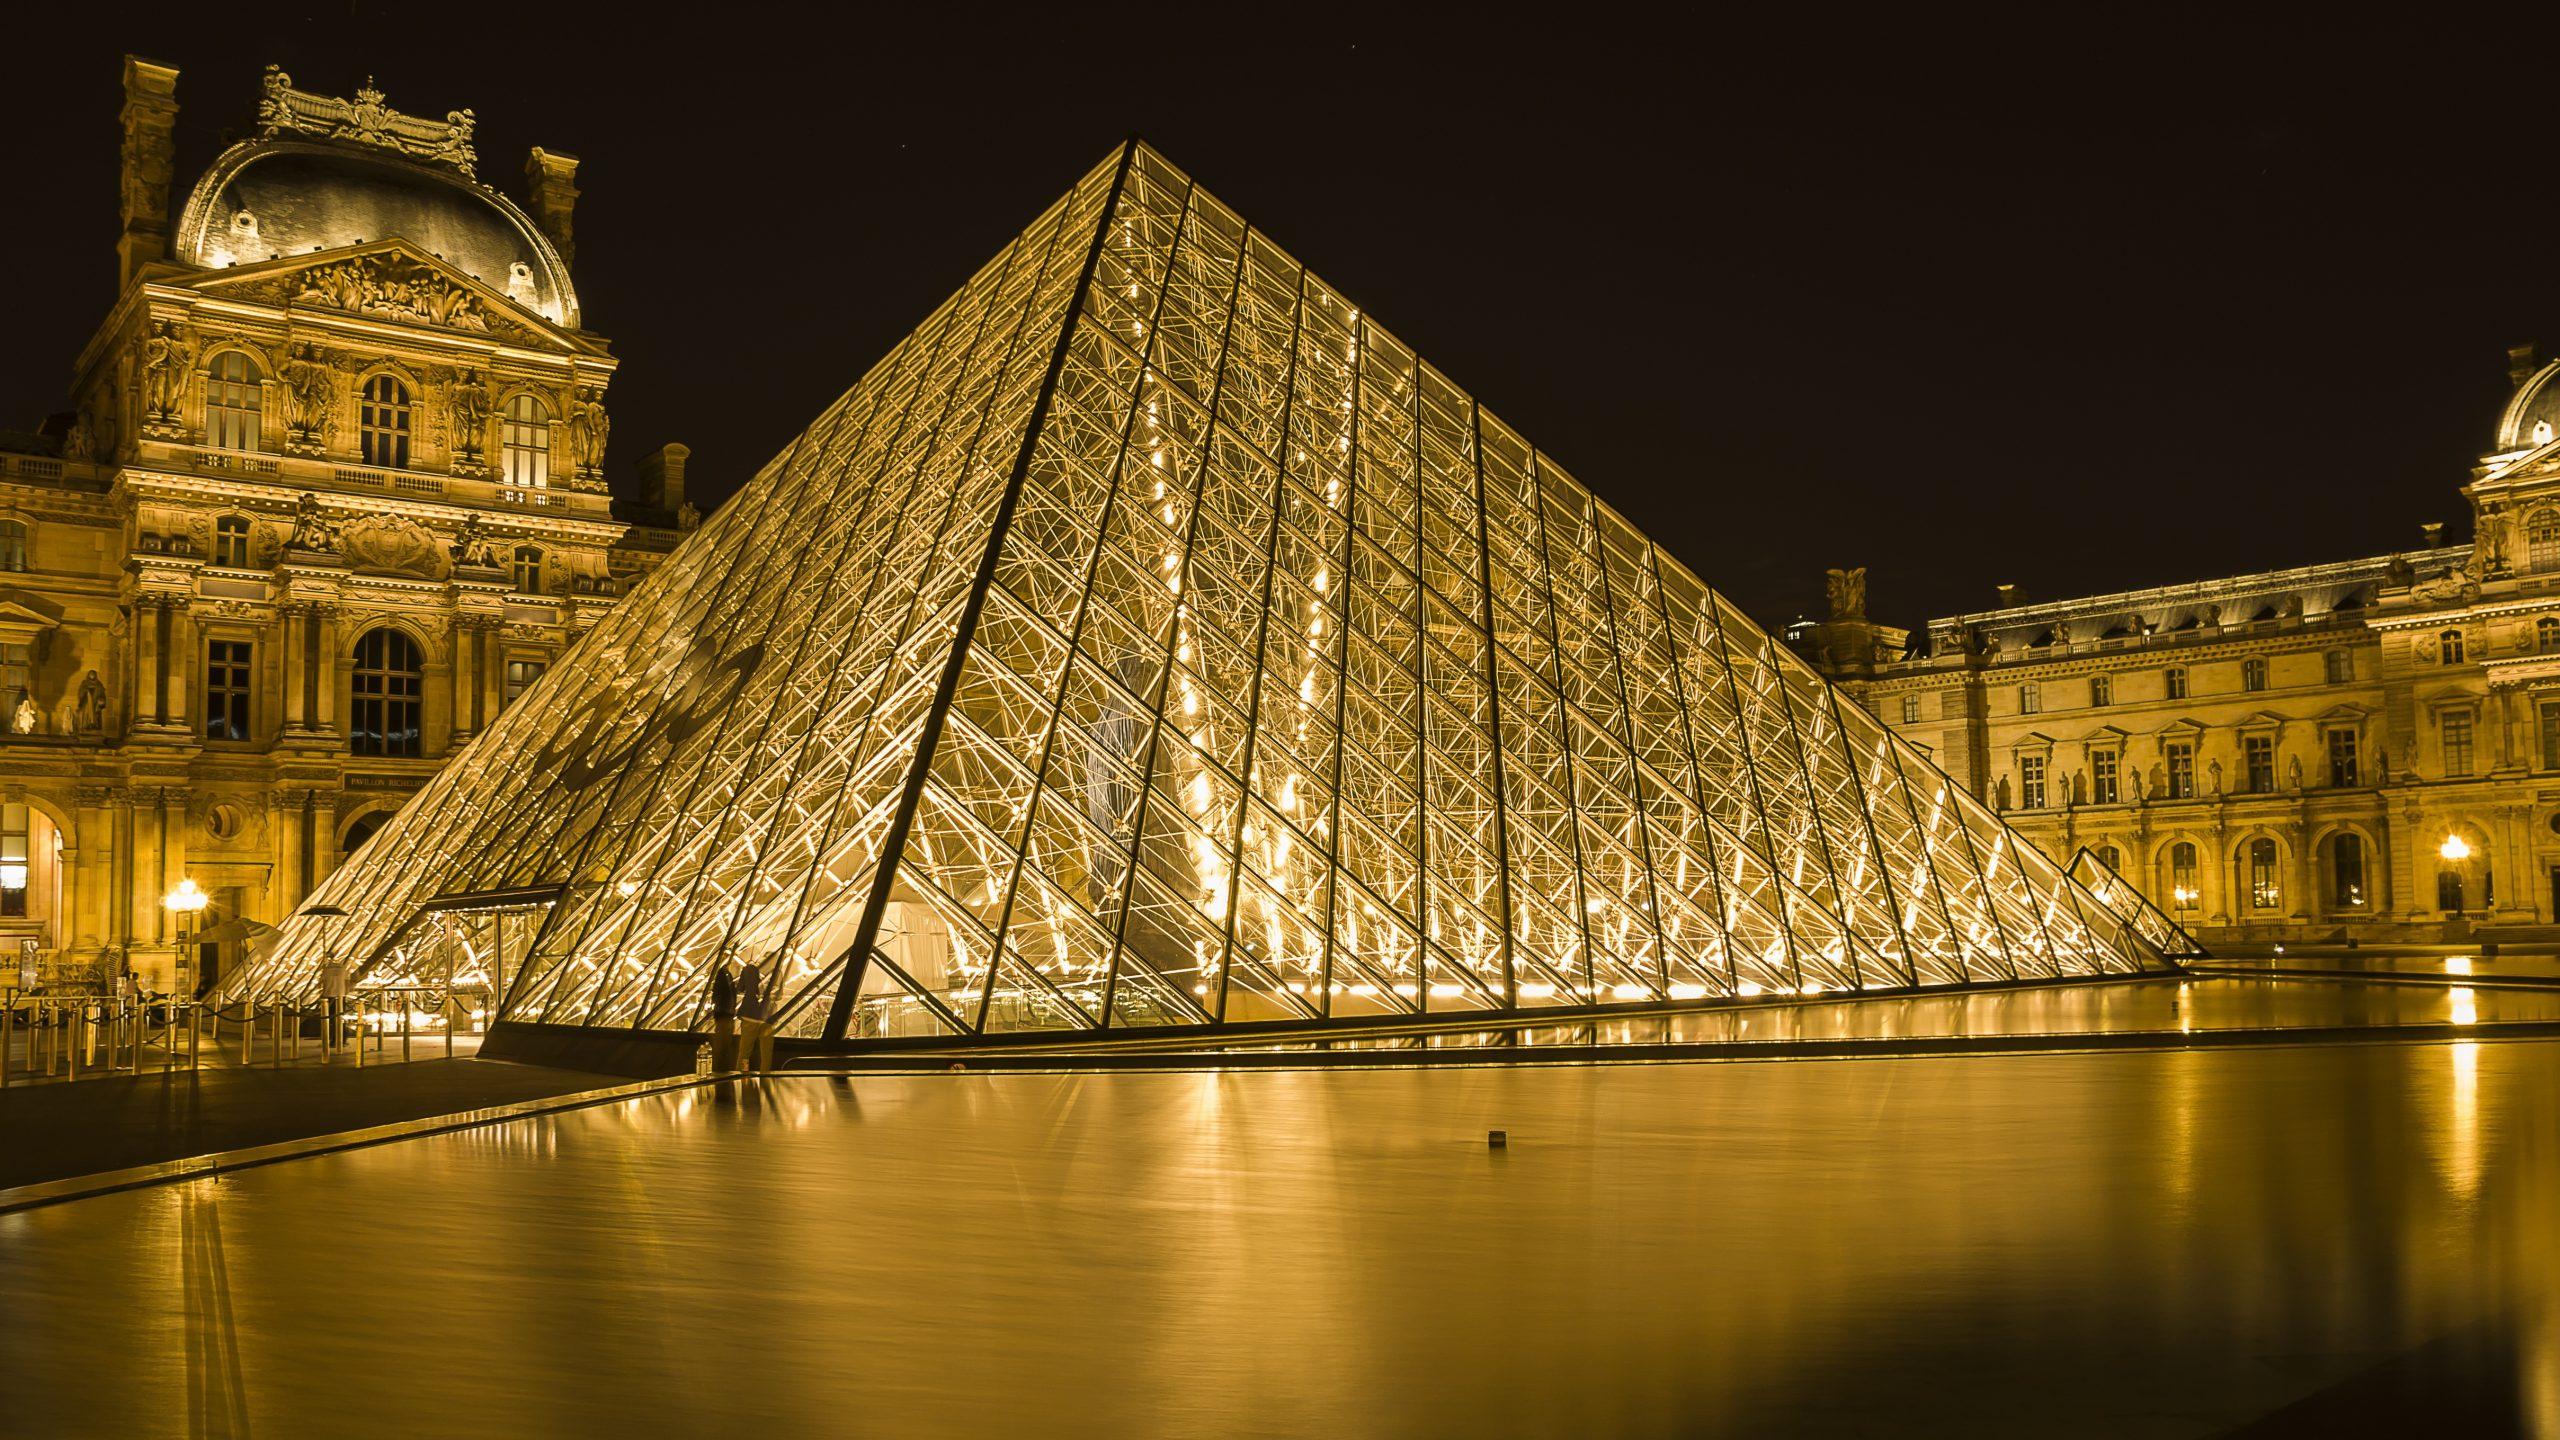 The Louvre Museum – Heart of City